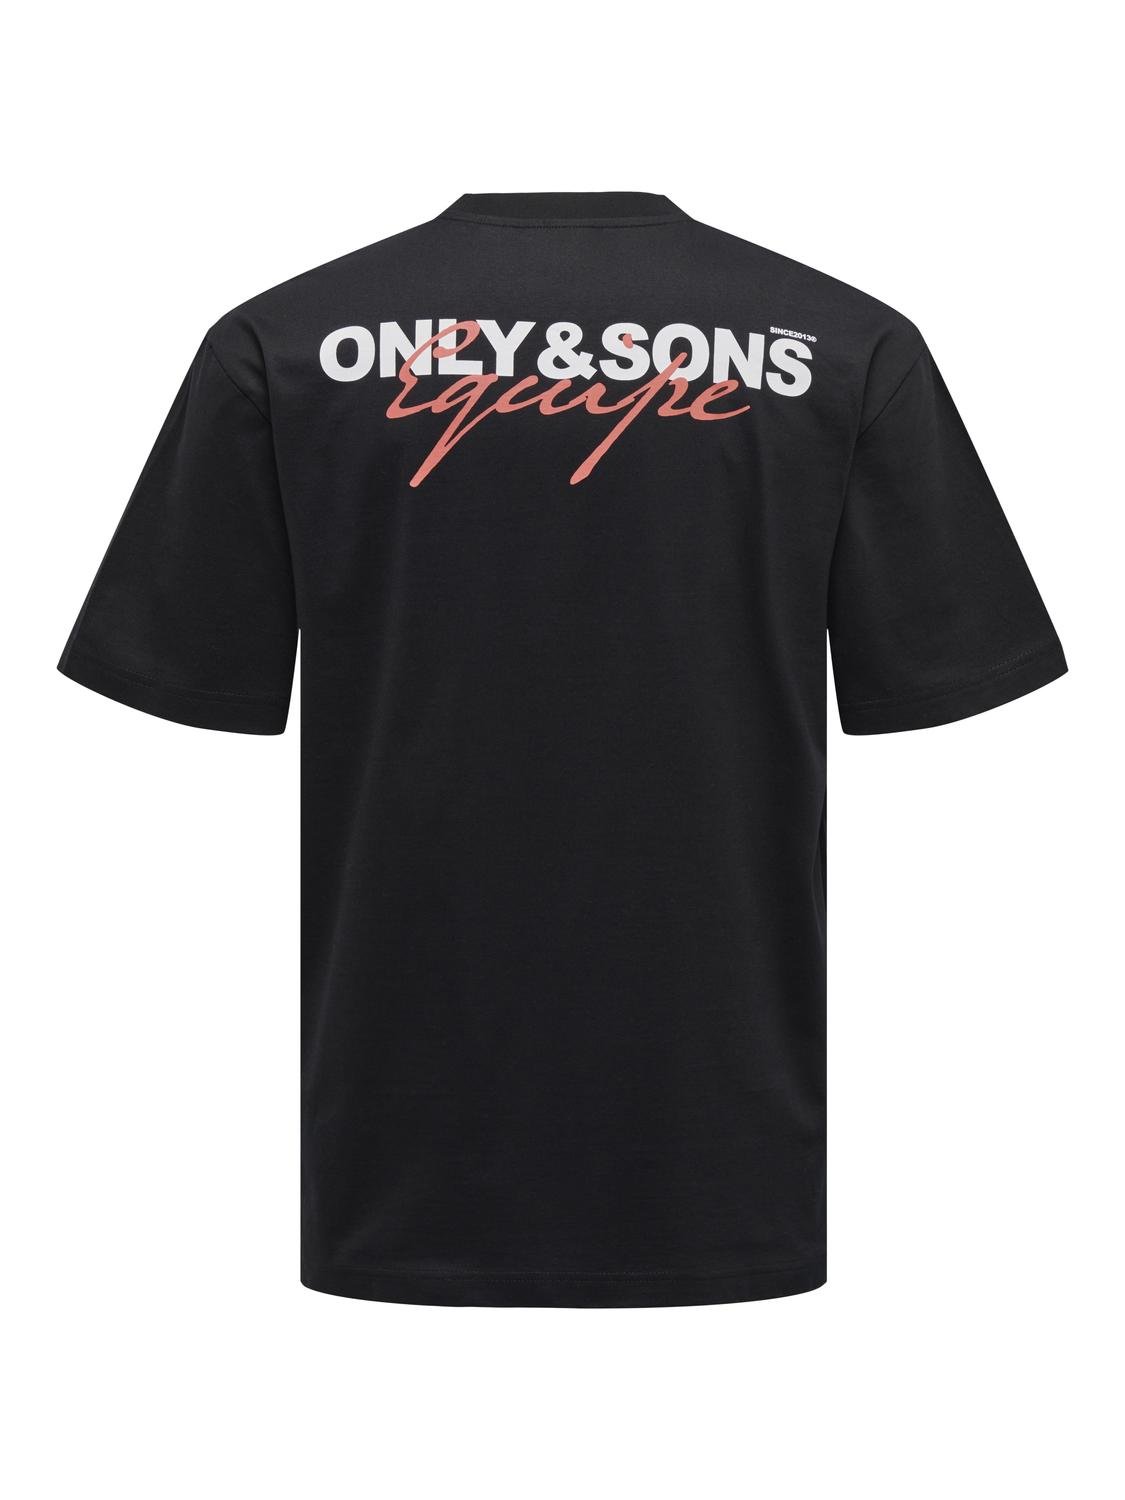 ONLY & SONS Relaxed Fit Round Neck T-Shirt -Black - 22027495